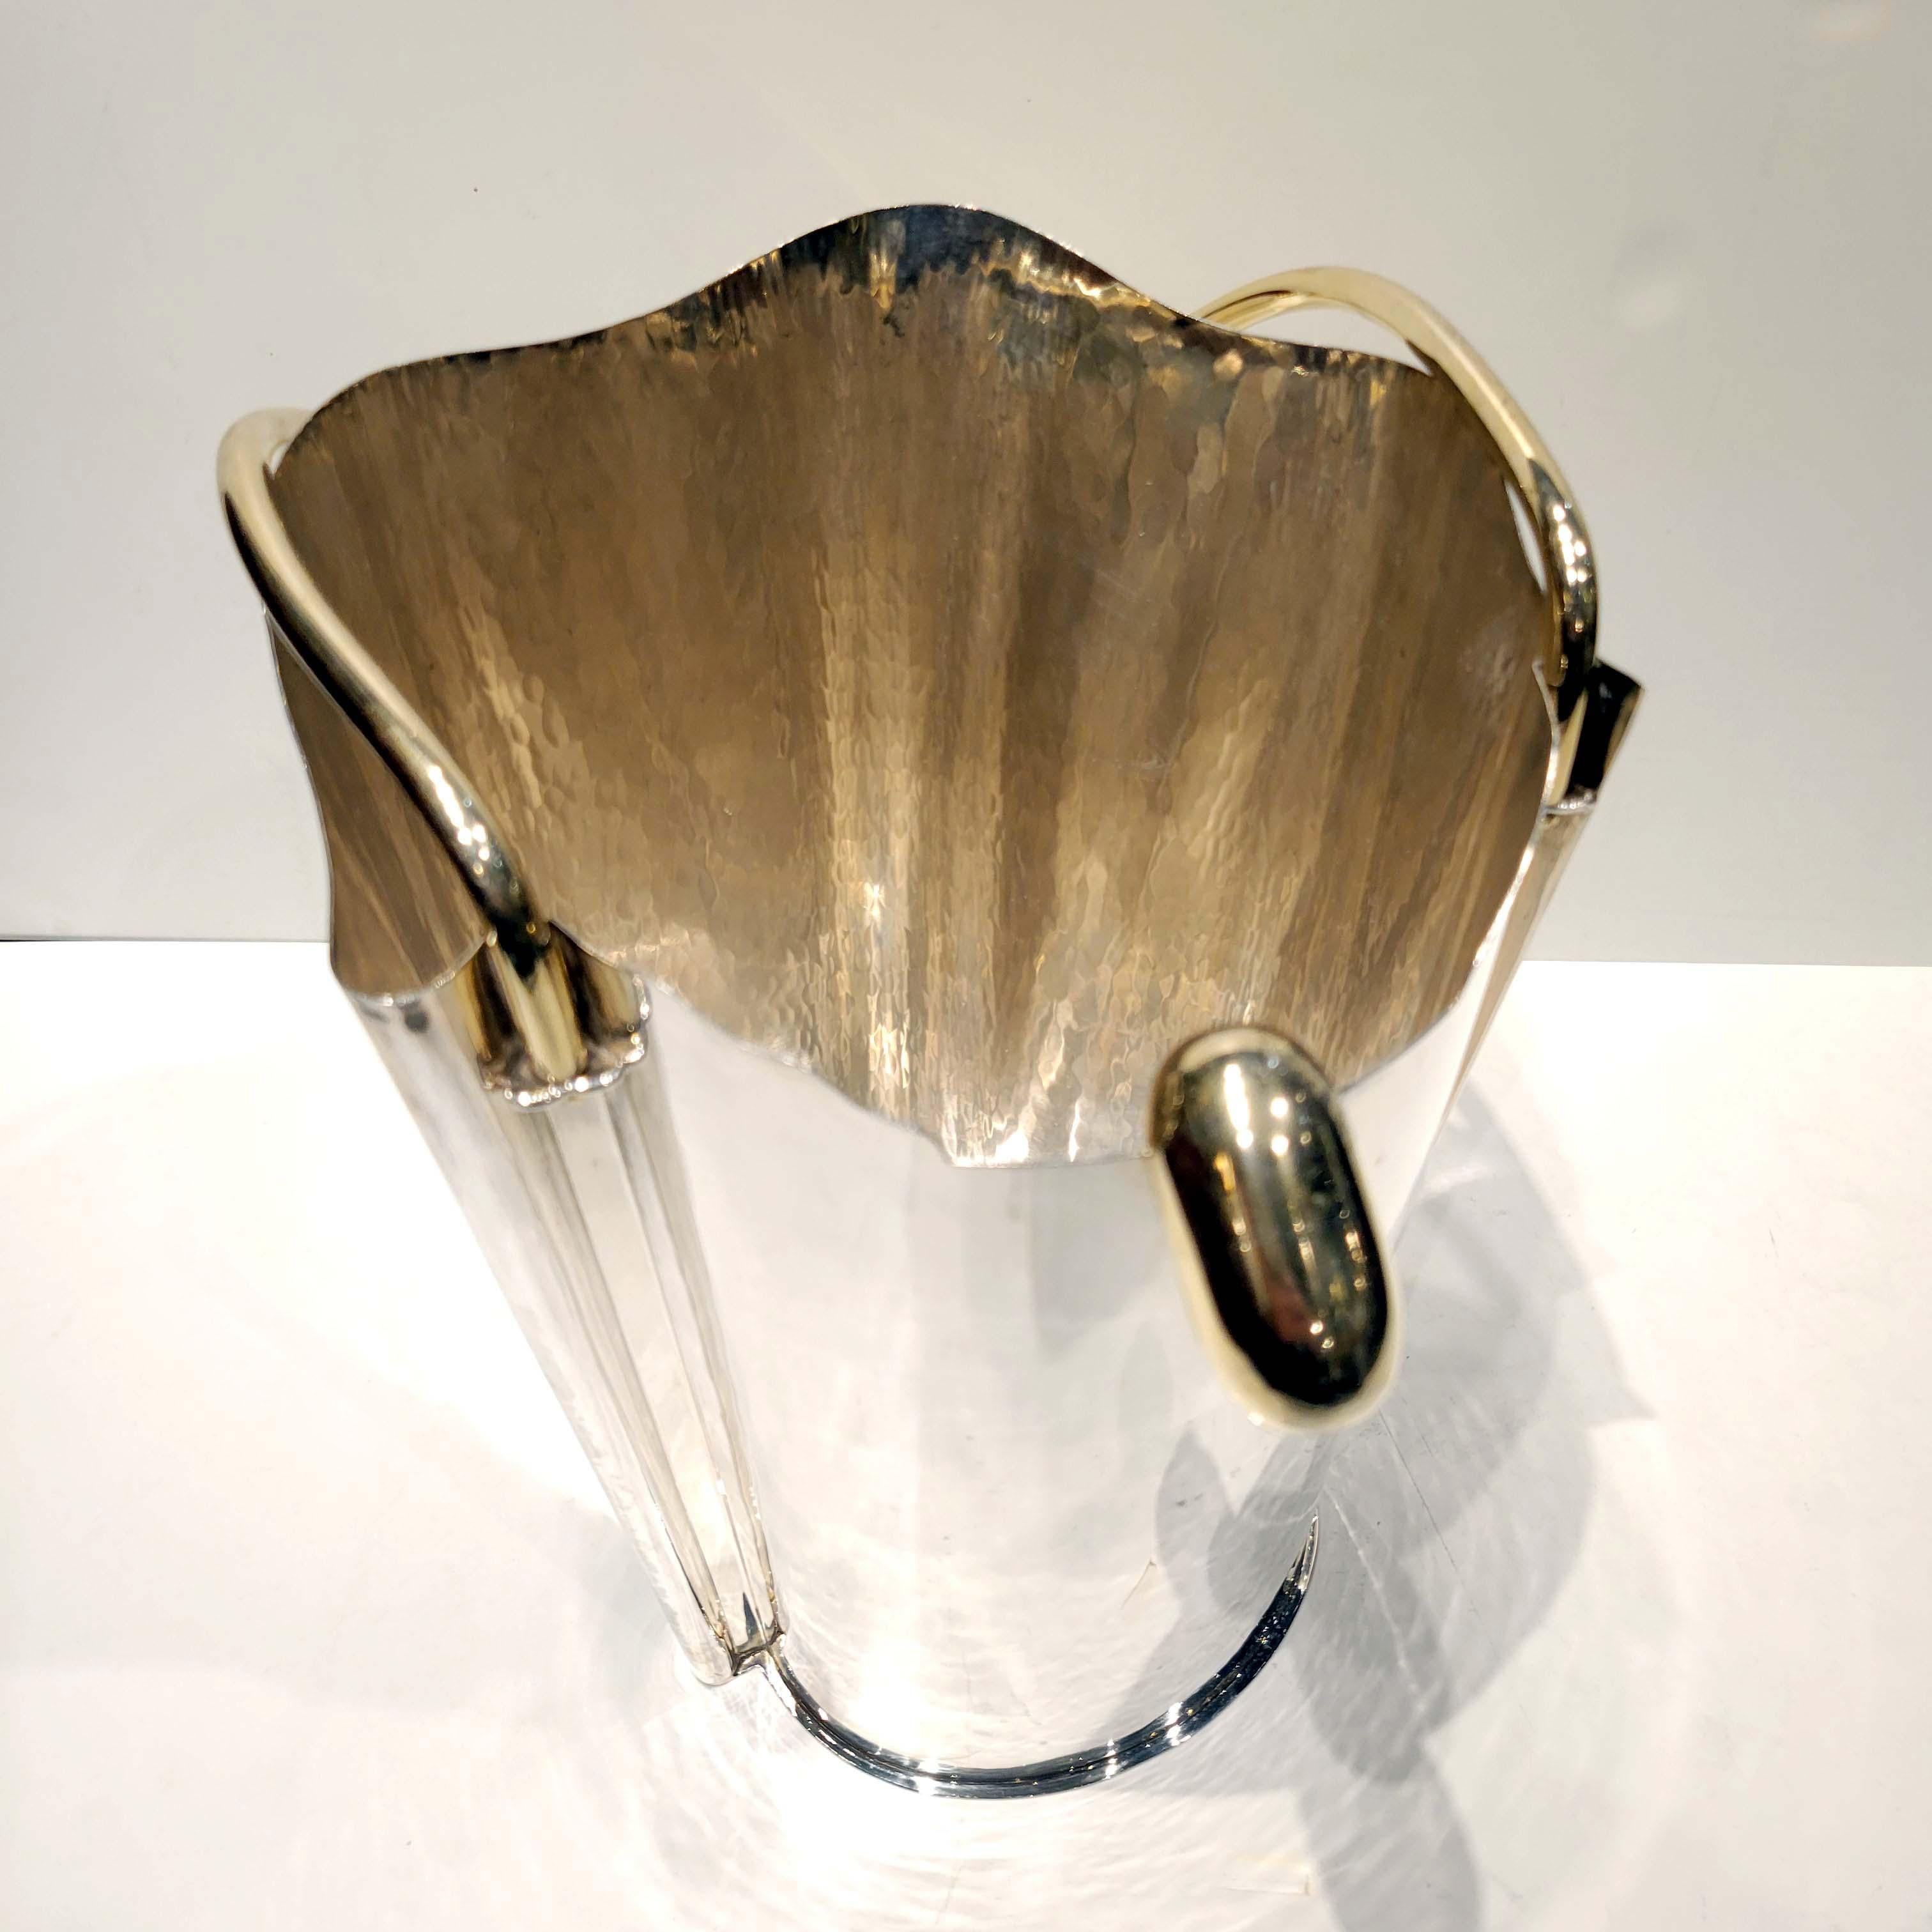 Modern Sterling Silver Champagne or Ice Bucket Designed by Borek Sipek for Cleto Munari For Sale